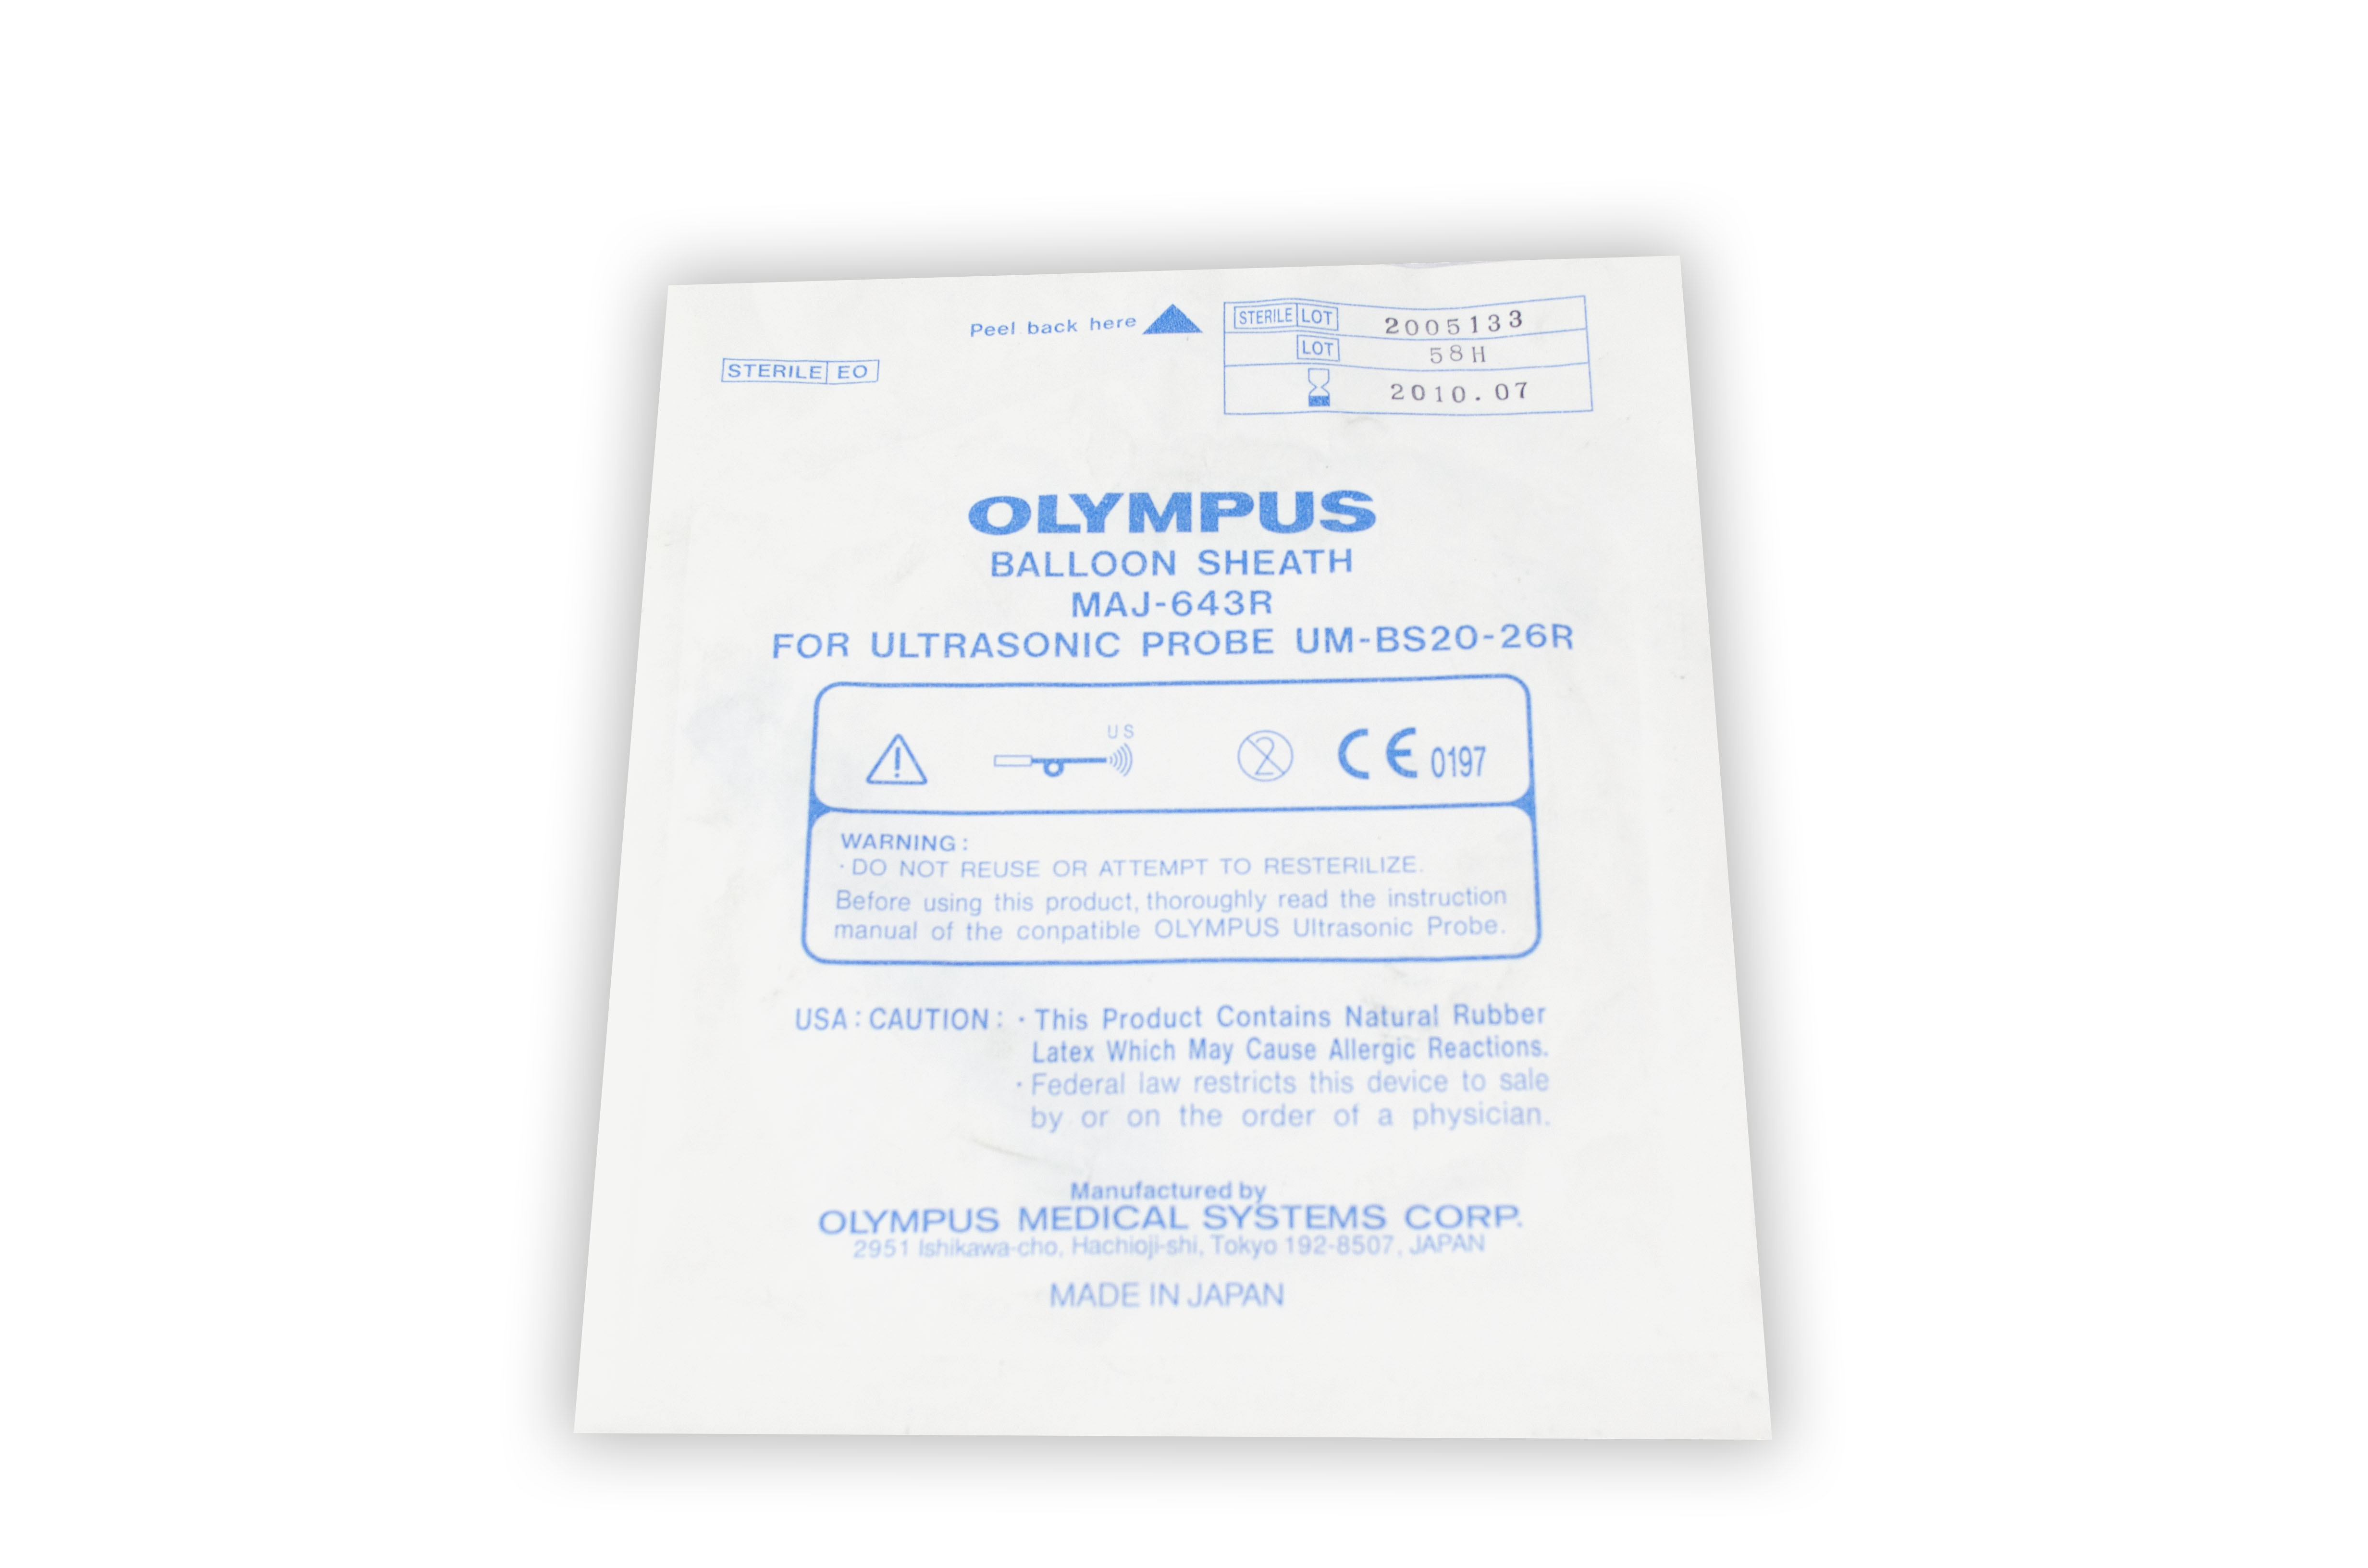 [Out-of-Date] Olympus Disposable Accessory - MAJ-643R